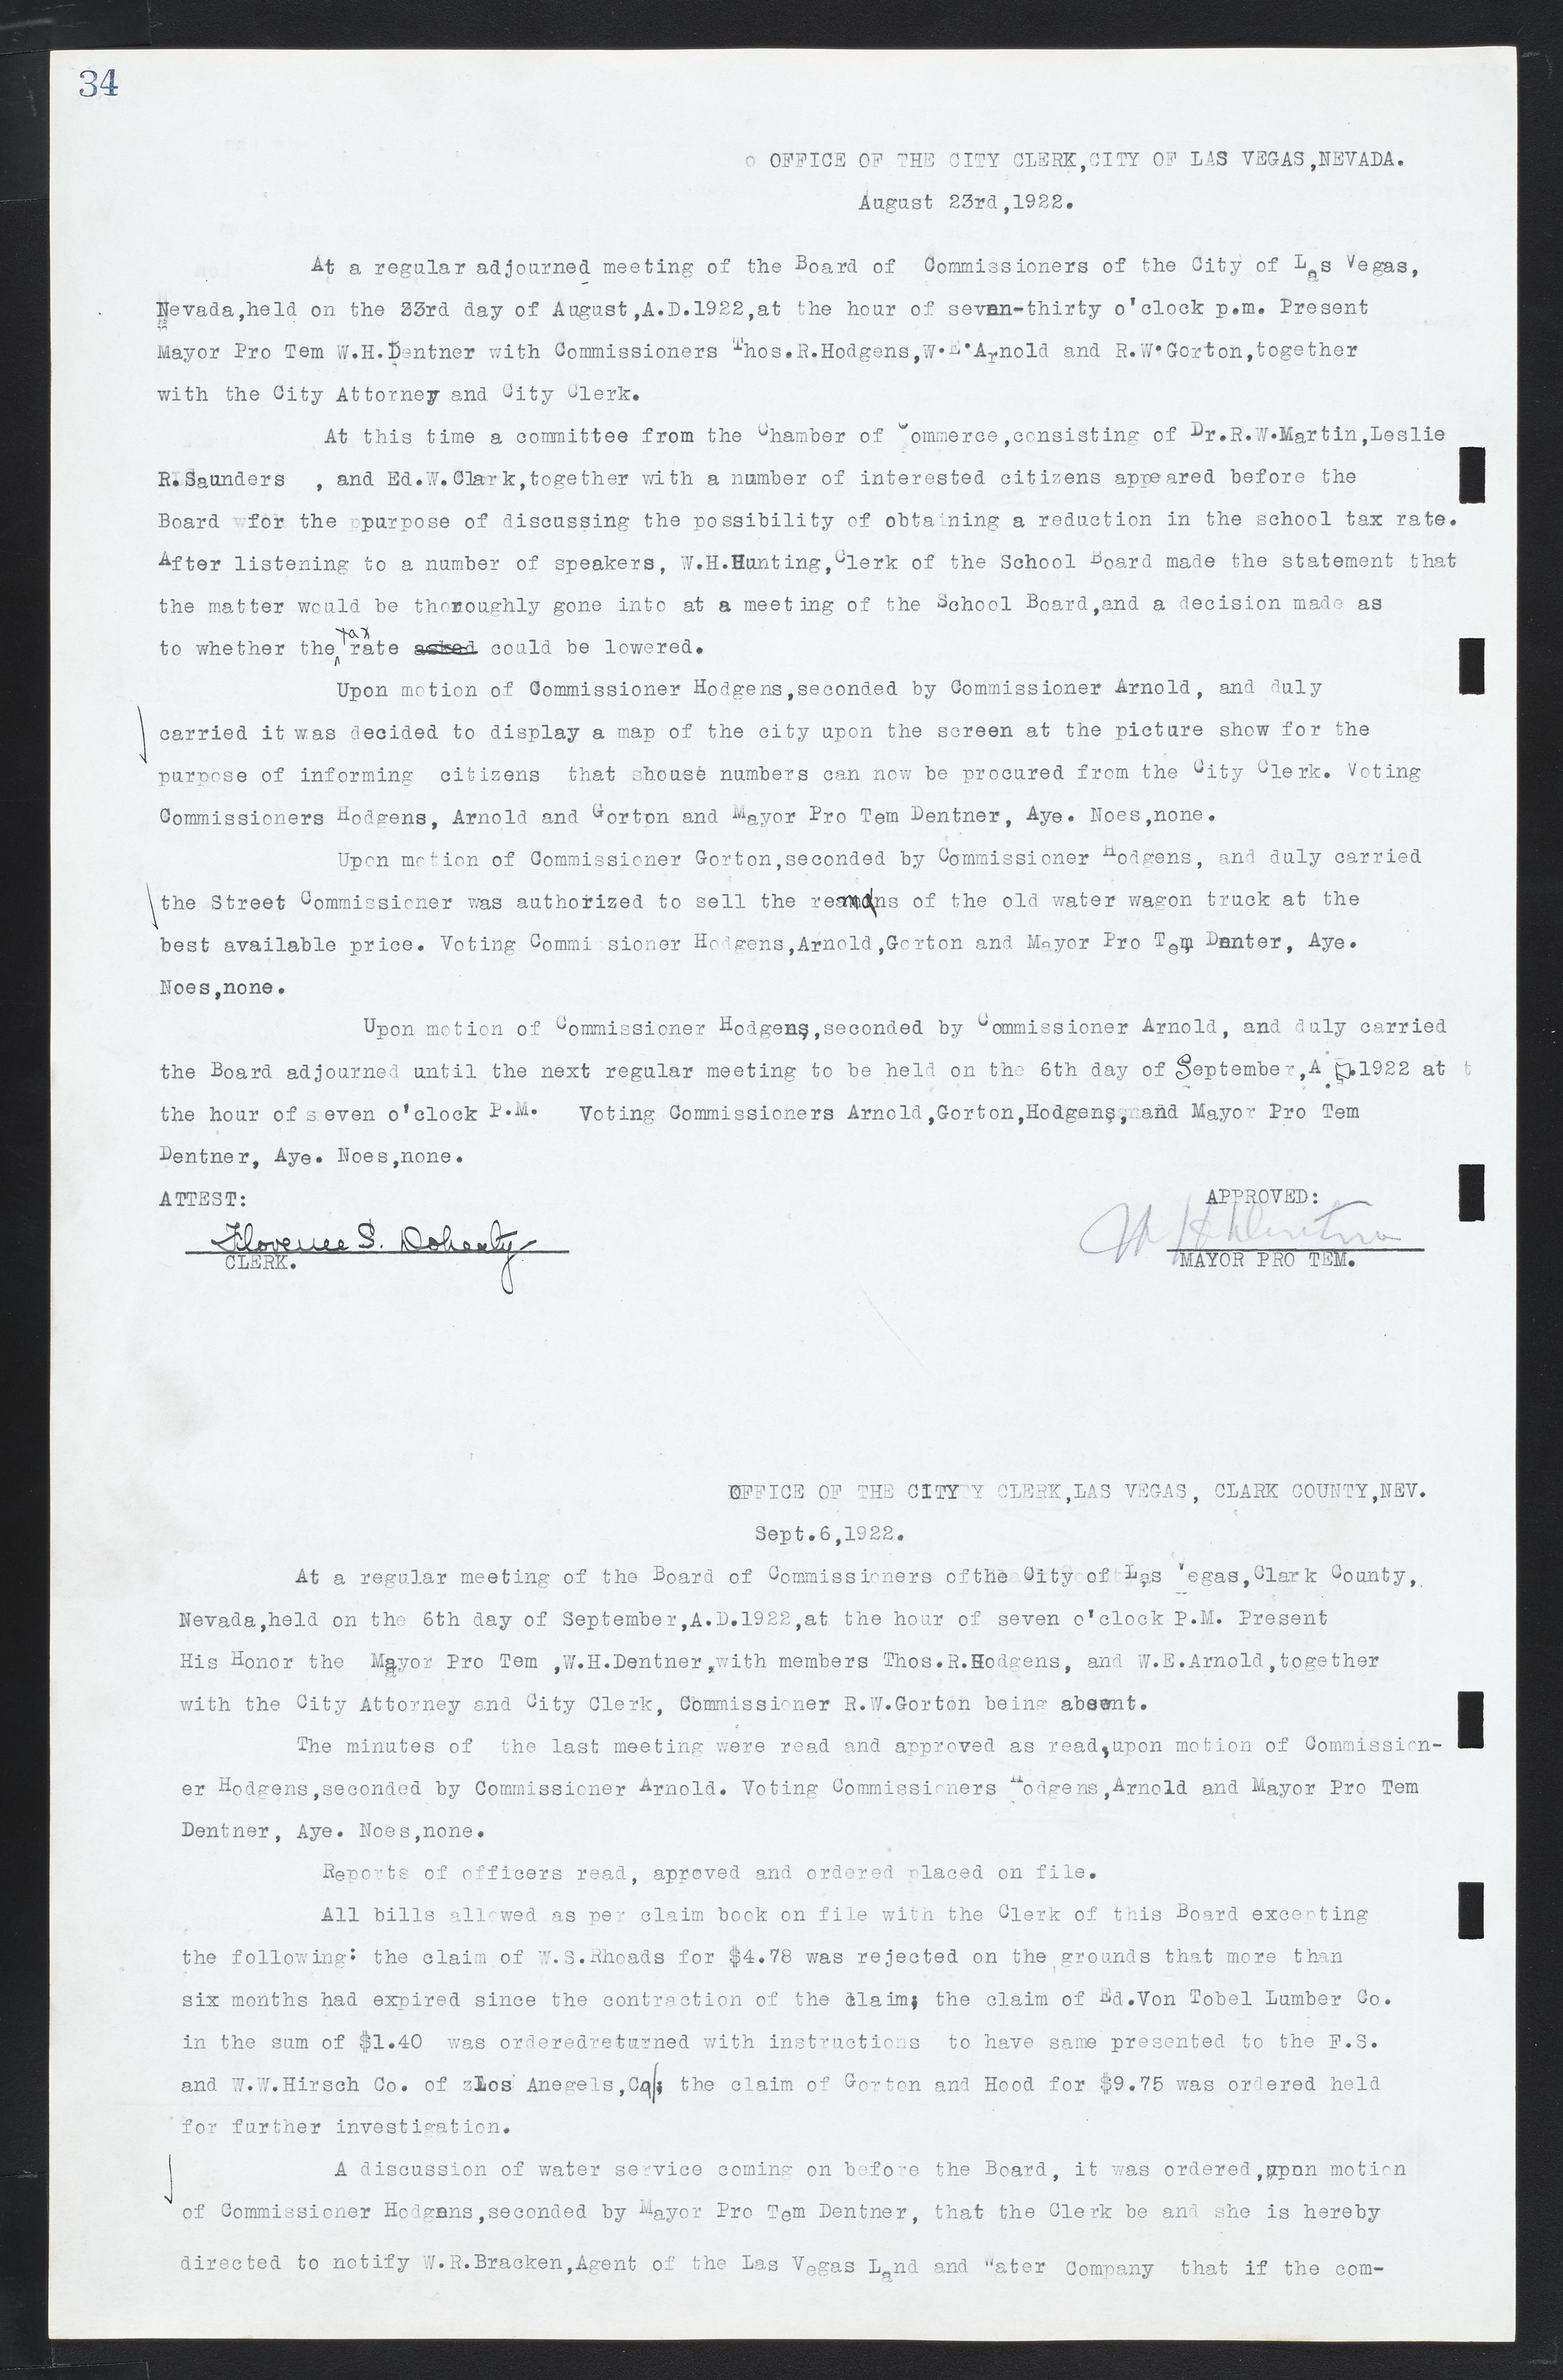 Las Vegas City Commission Minutes, March 1, 1922 to May 10, 1929, lvc000002-41